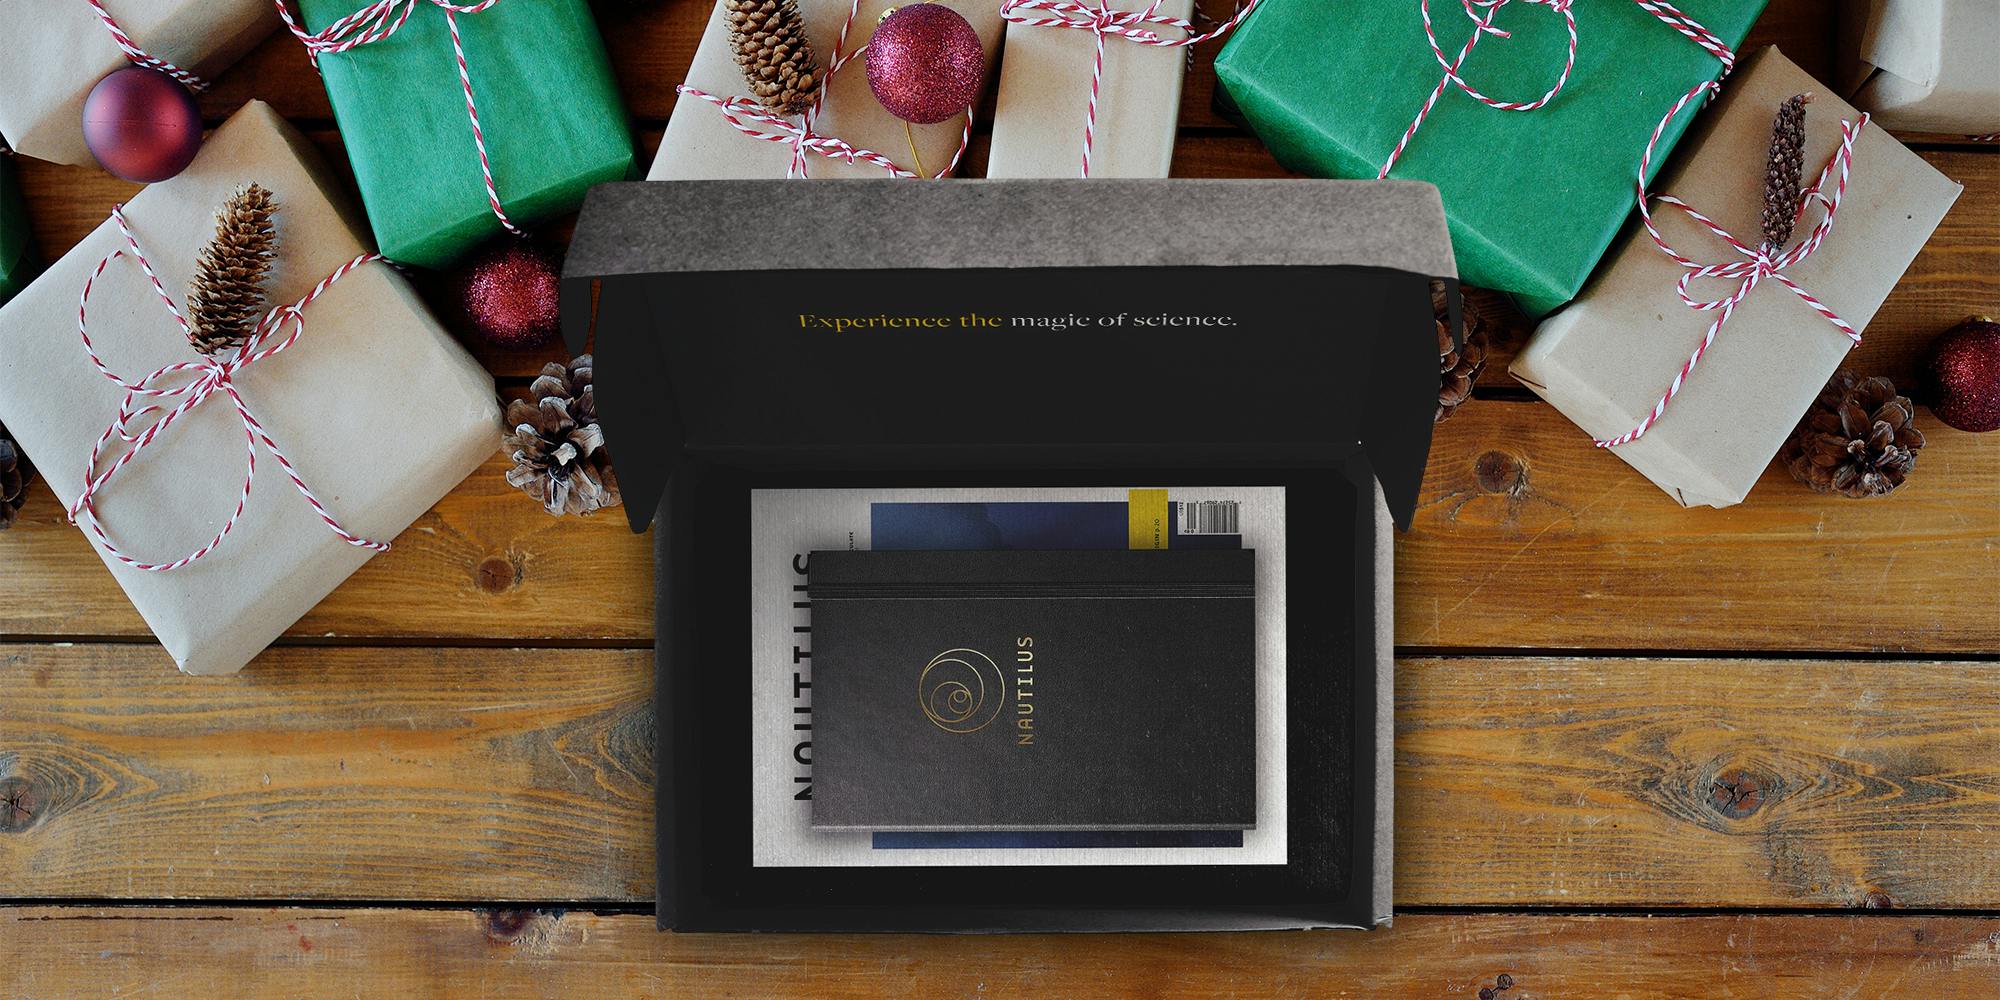 Nautilus subscription box on a wooden floor surrounded by wrapped gifts